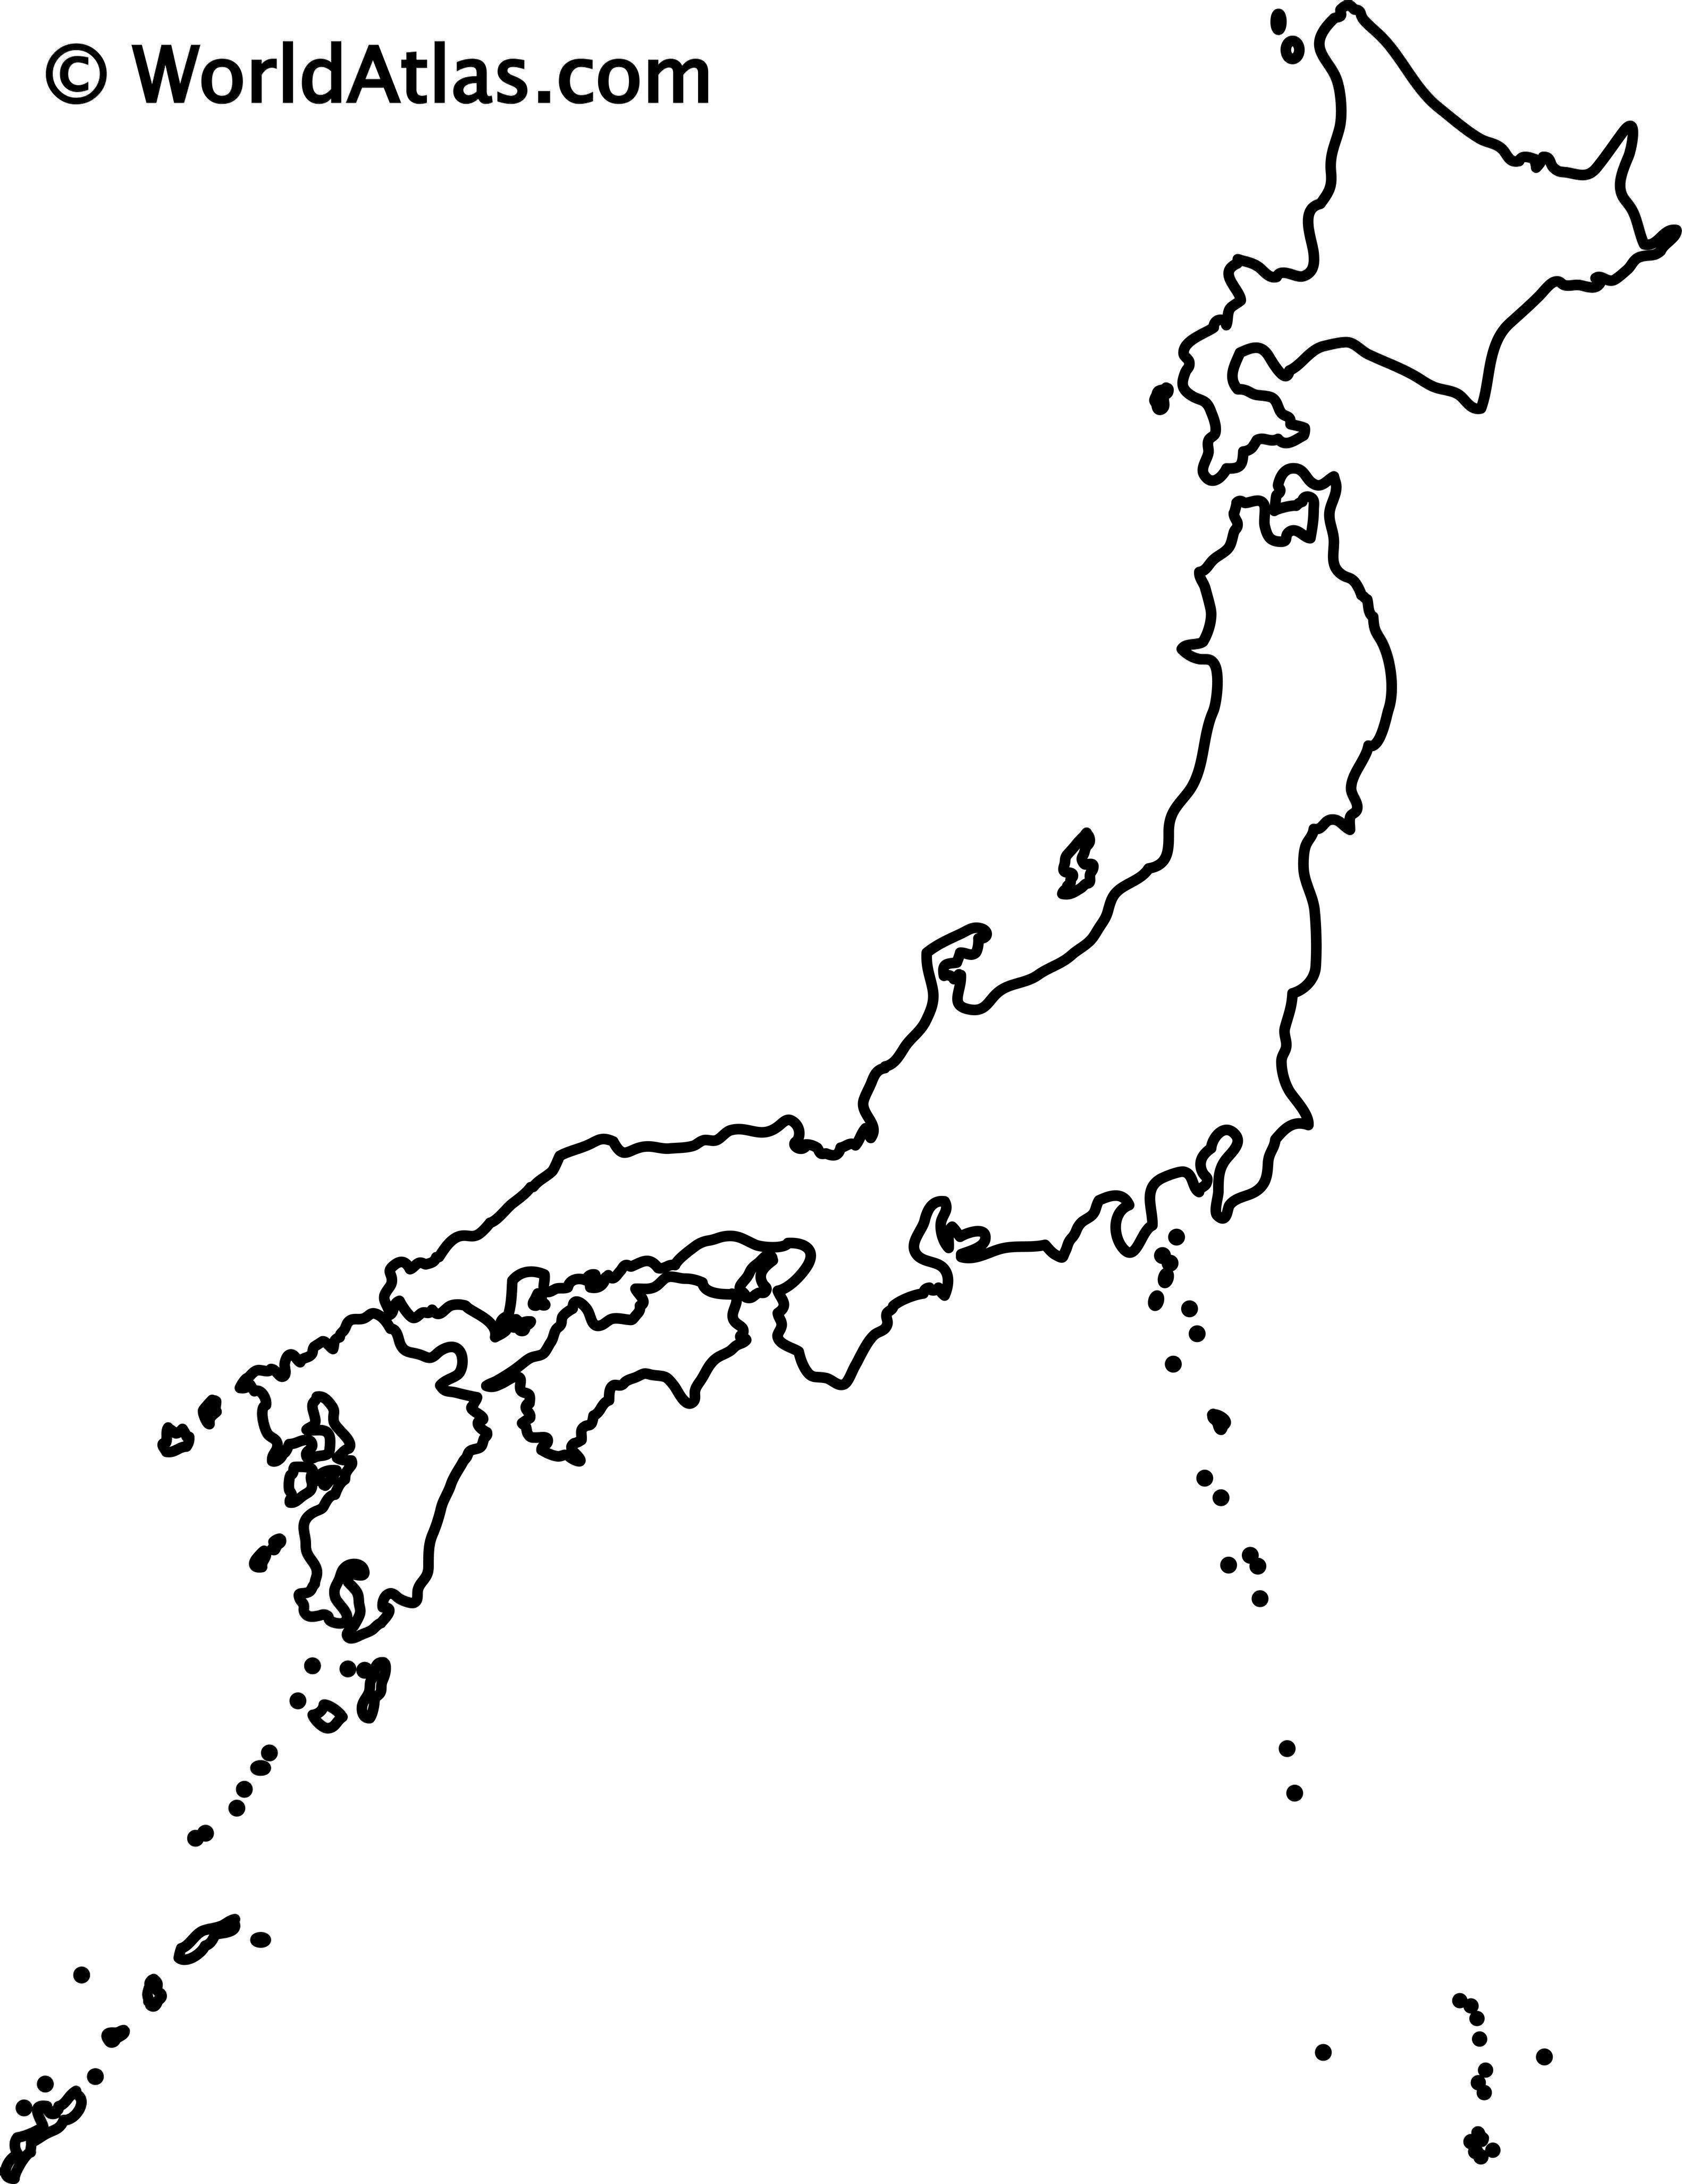  /><br /><br/><p>Blank Map Japan</p></center></center>
<div style='clear: both;'></div>
</div>
<div class='post-footer'>
<div class='post-footer-line post-footer-line-1'>
<div style=